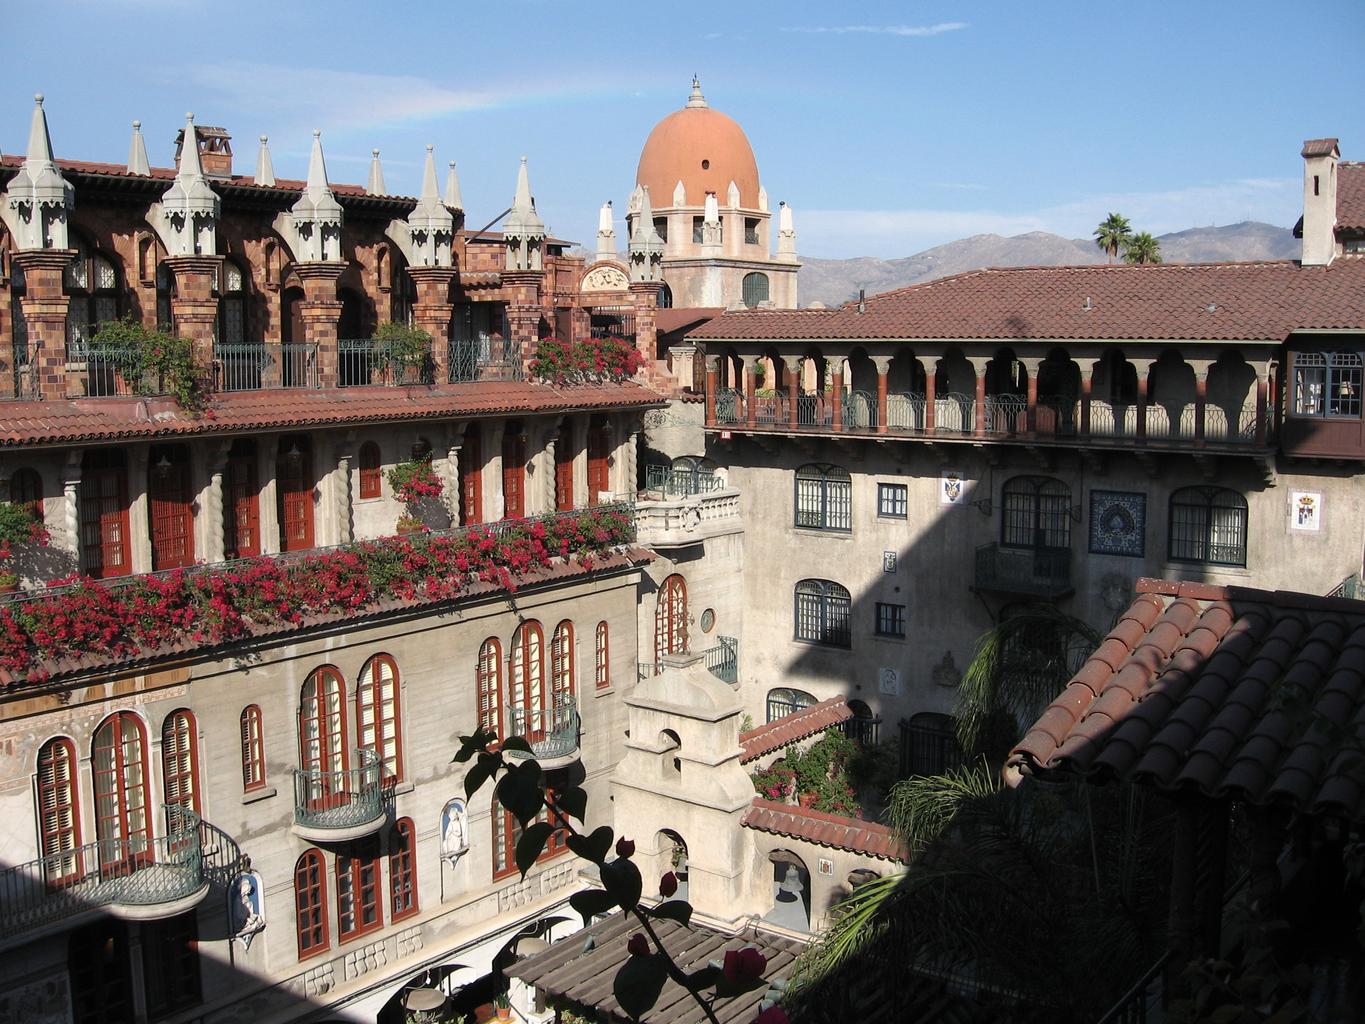 An image of the Mission Inn Hotel & Spa, one of the premiere destinations in Riverside County.